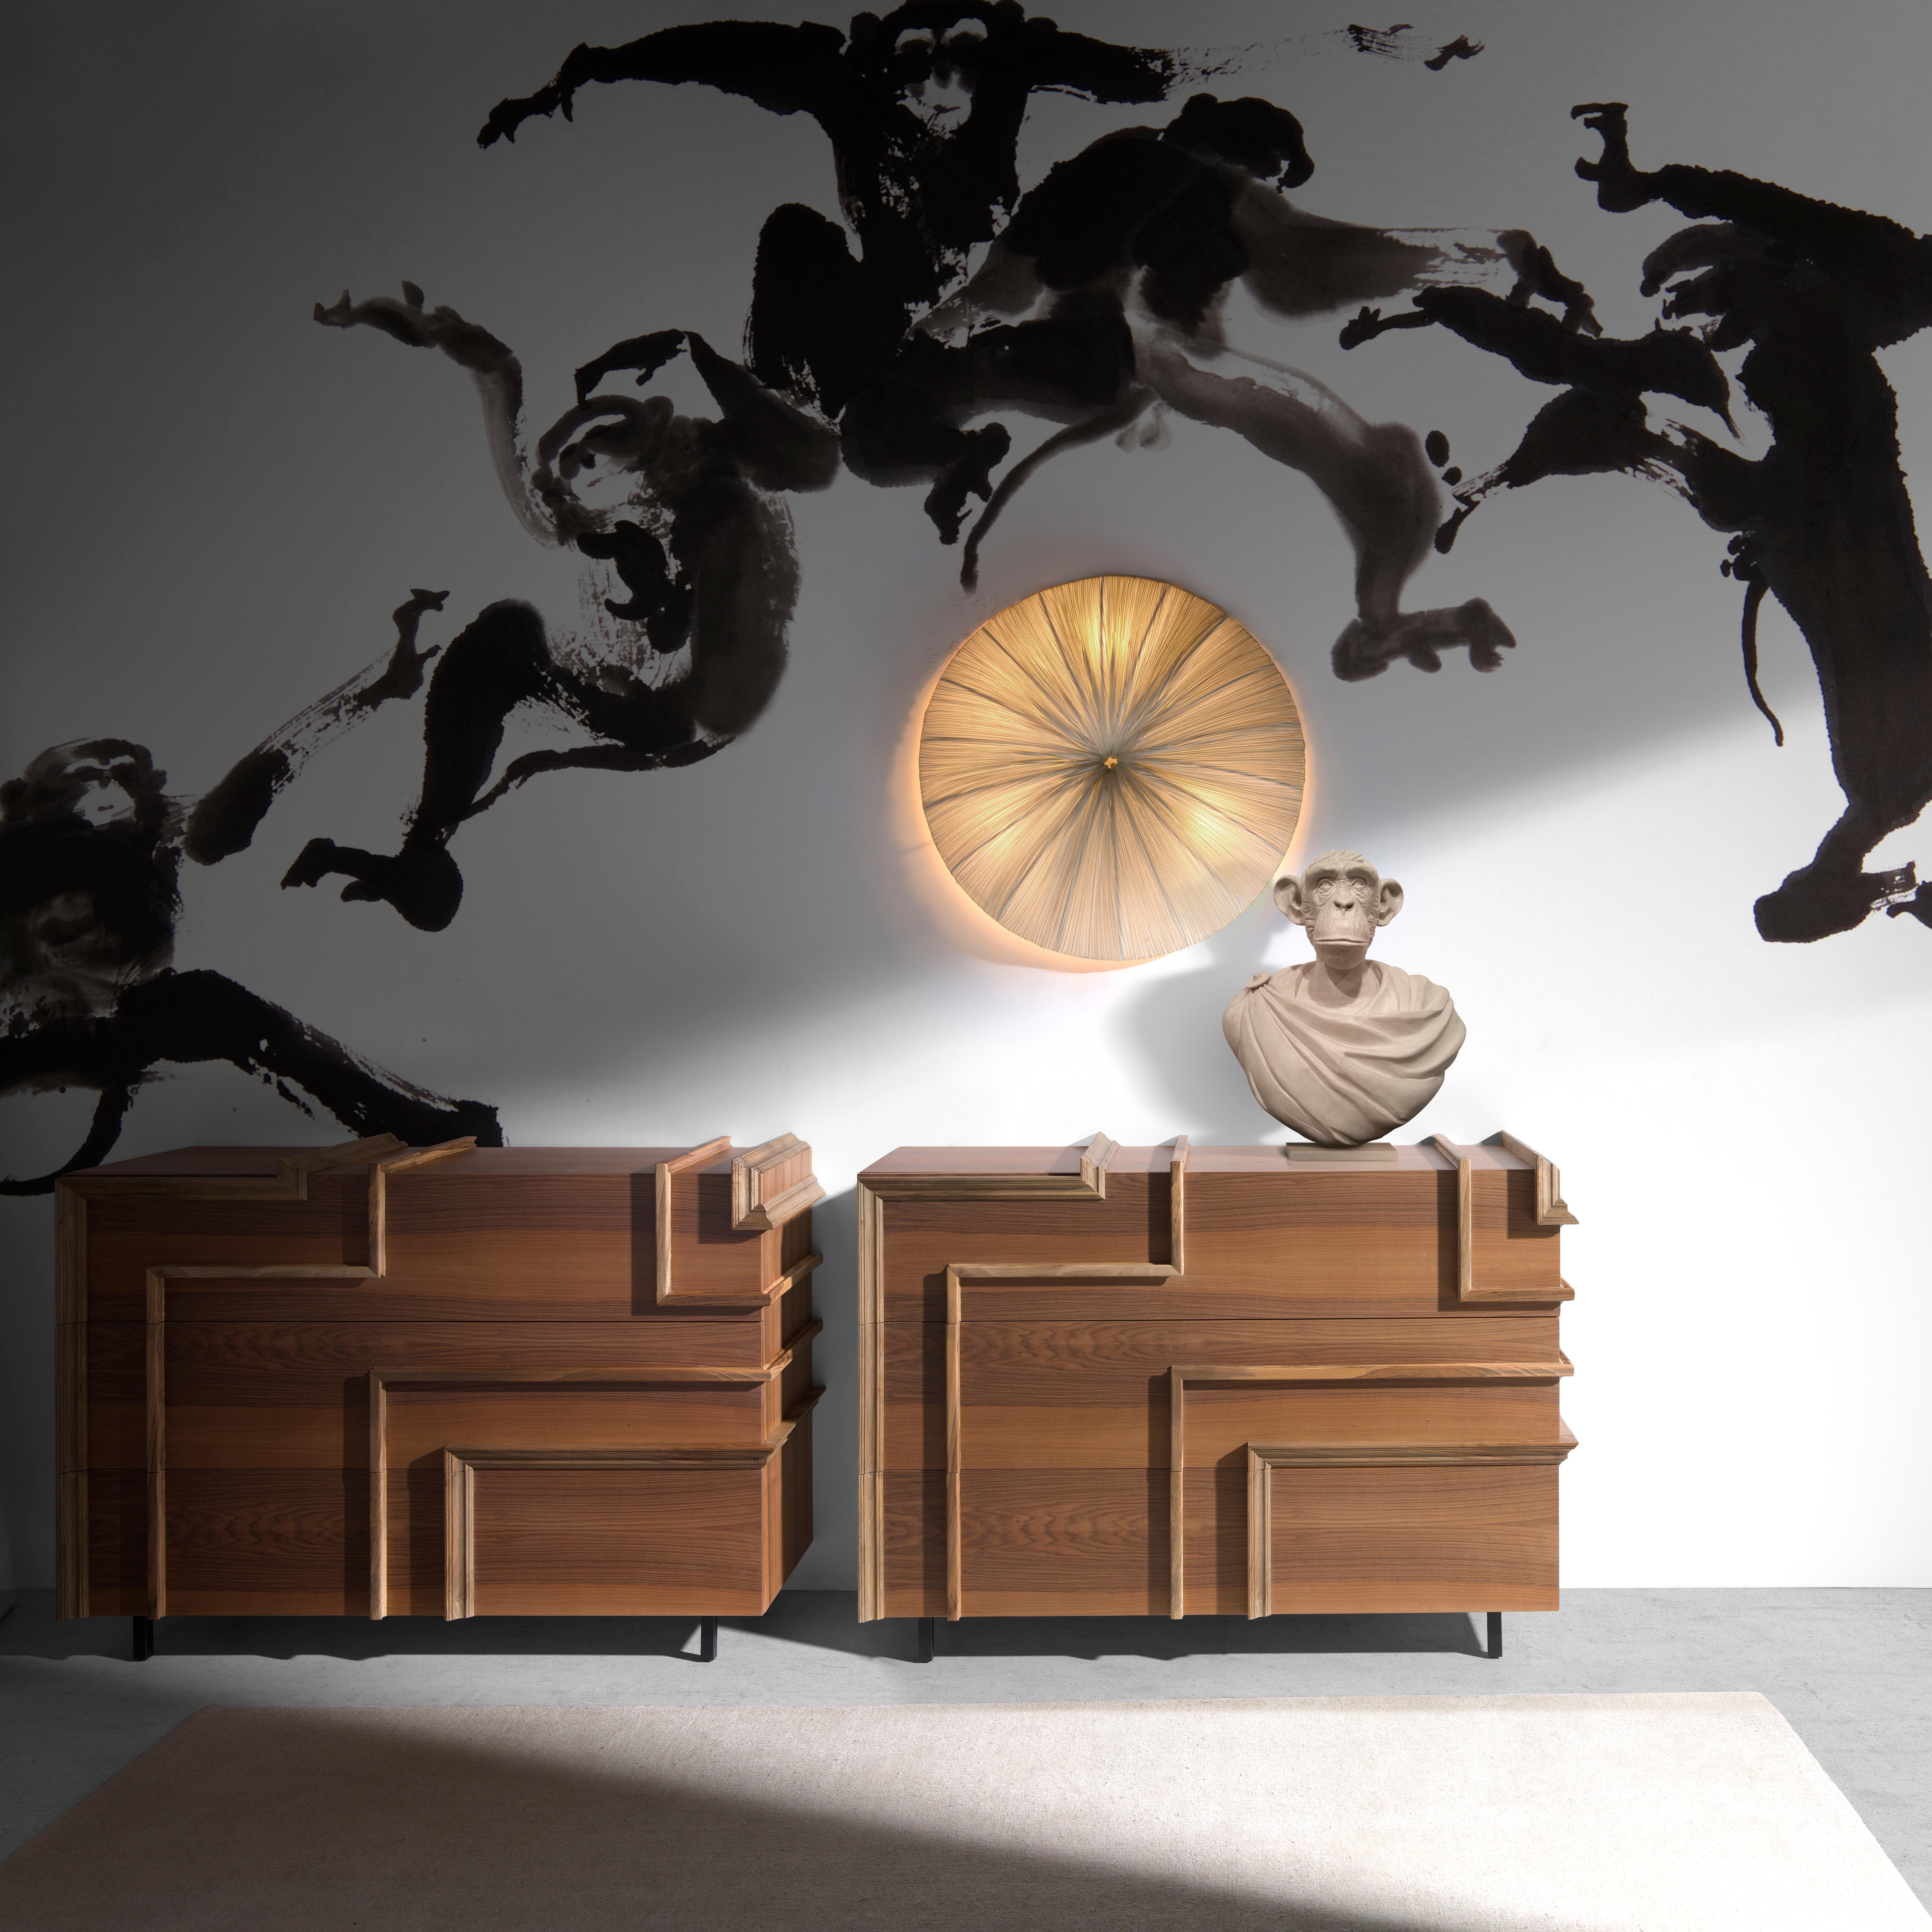 Khalo is more than just a chest; It is a design piece that evokes a feeling of sophistication and good taste. With a walnut wood skin and a set of relief moldings that run along its body and direct our gaze. Its timeless design and quality